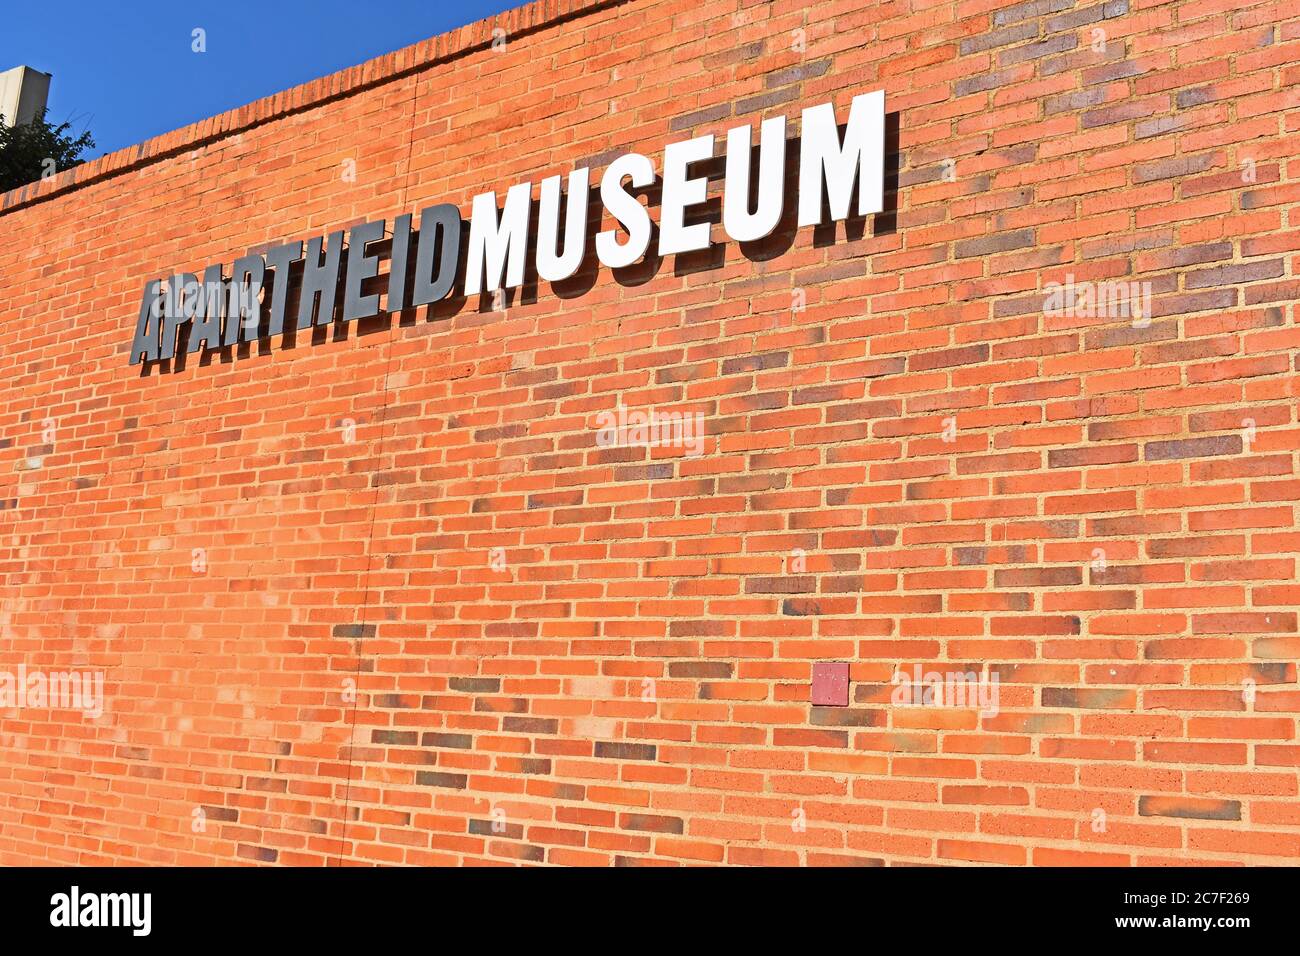 A red brick wall with a sign for the Apartheid Museum in Johannesburg, South Africa. Stock Photo